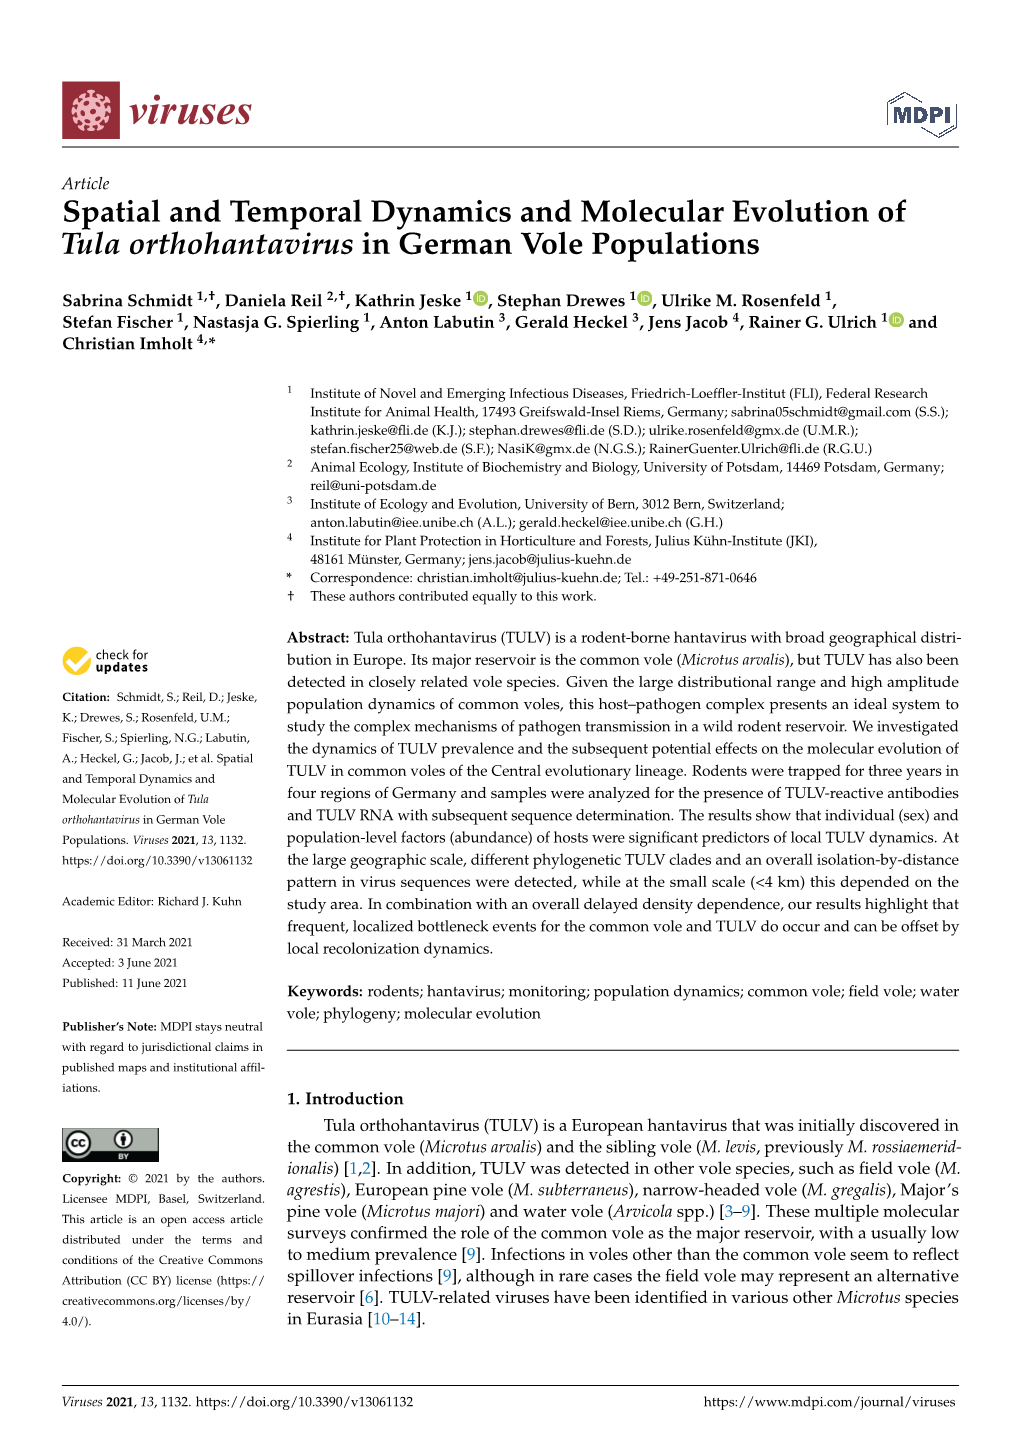 Spatial and Temporal Dynamics and Molecular Evolution of Tula Orthohantavirus in German Vole Populations